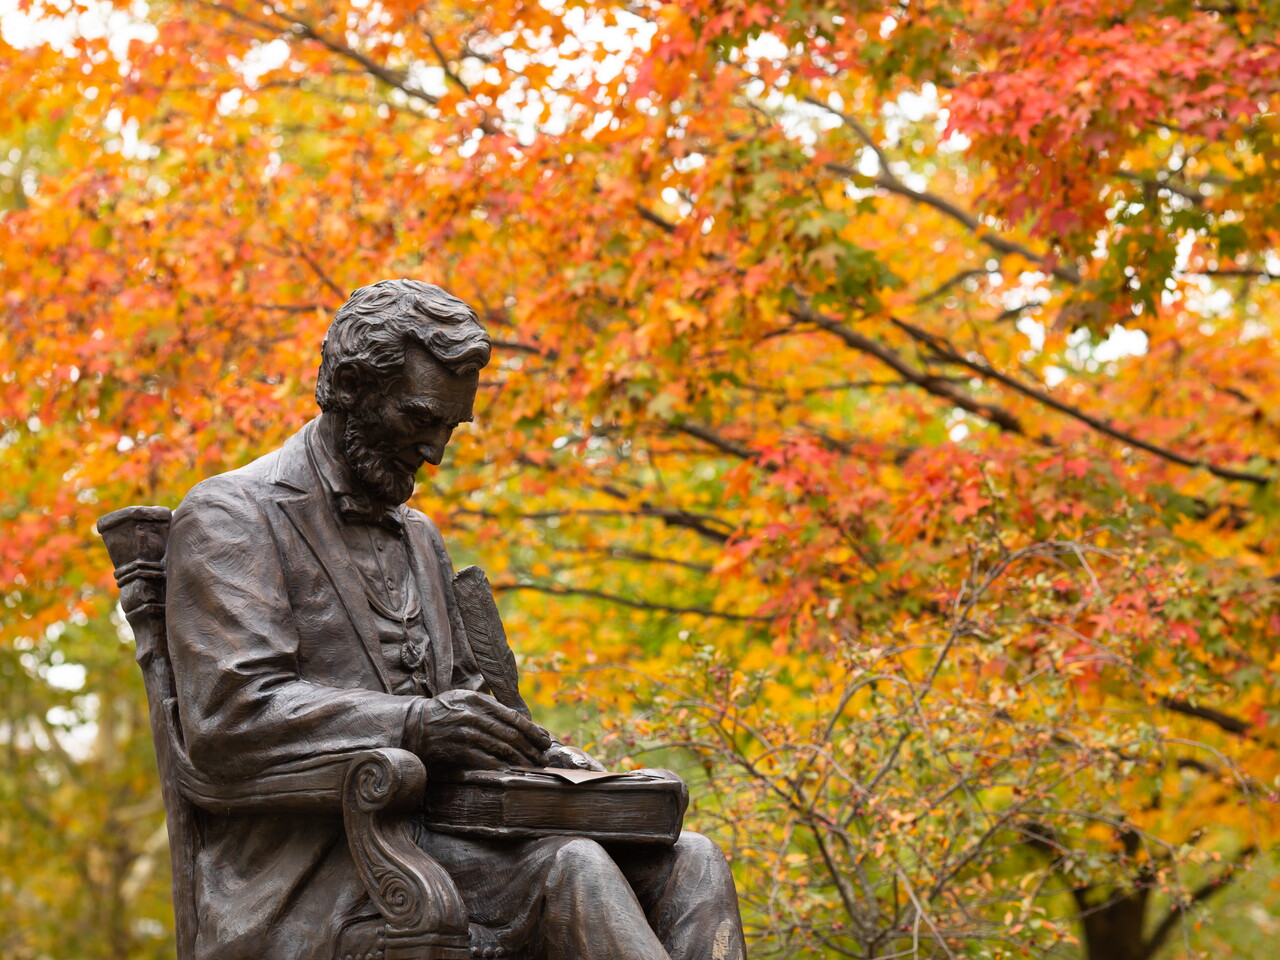 Photograph taken during autumn, showing statue of Lincoln with quill in hand, on Gettysburg campus, fall folliage in background